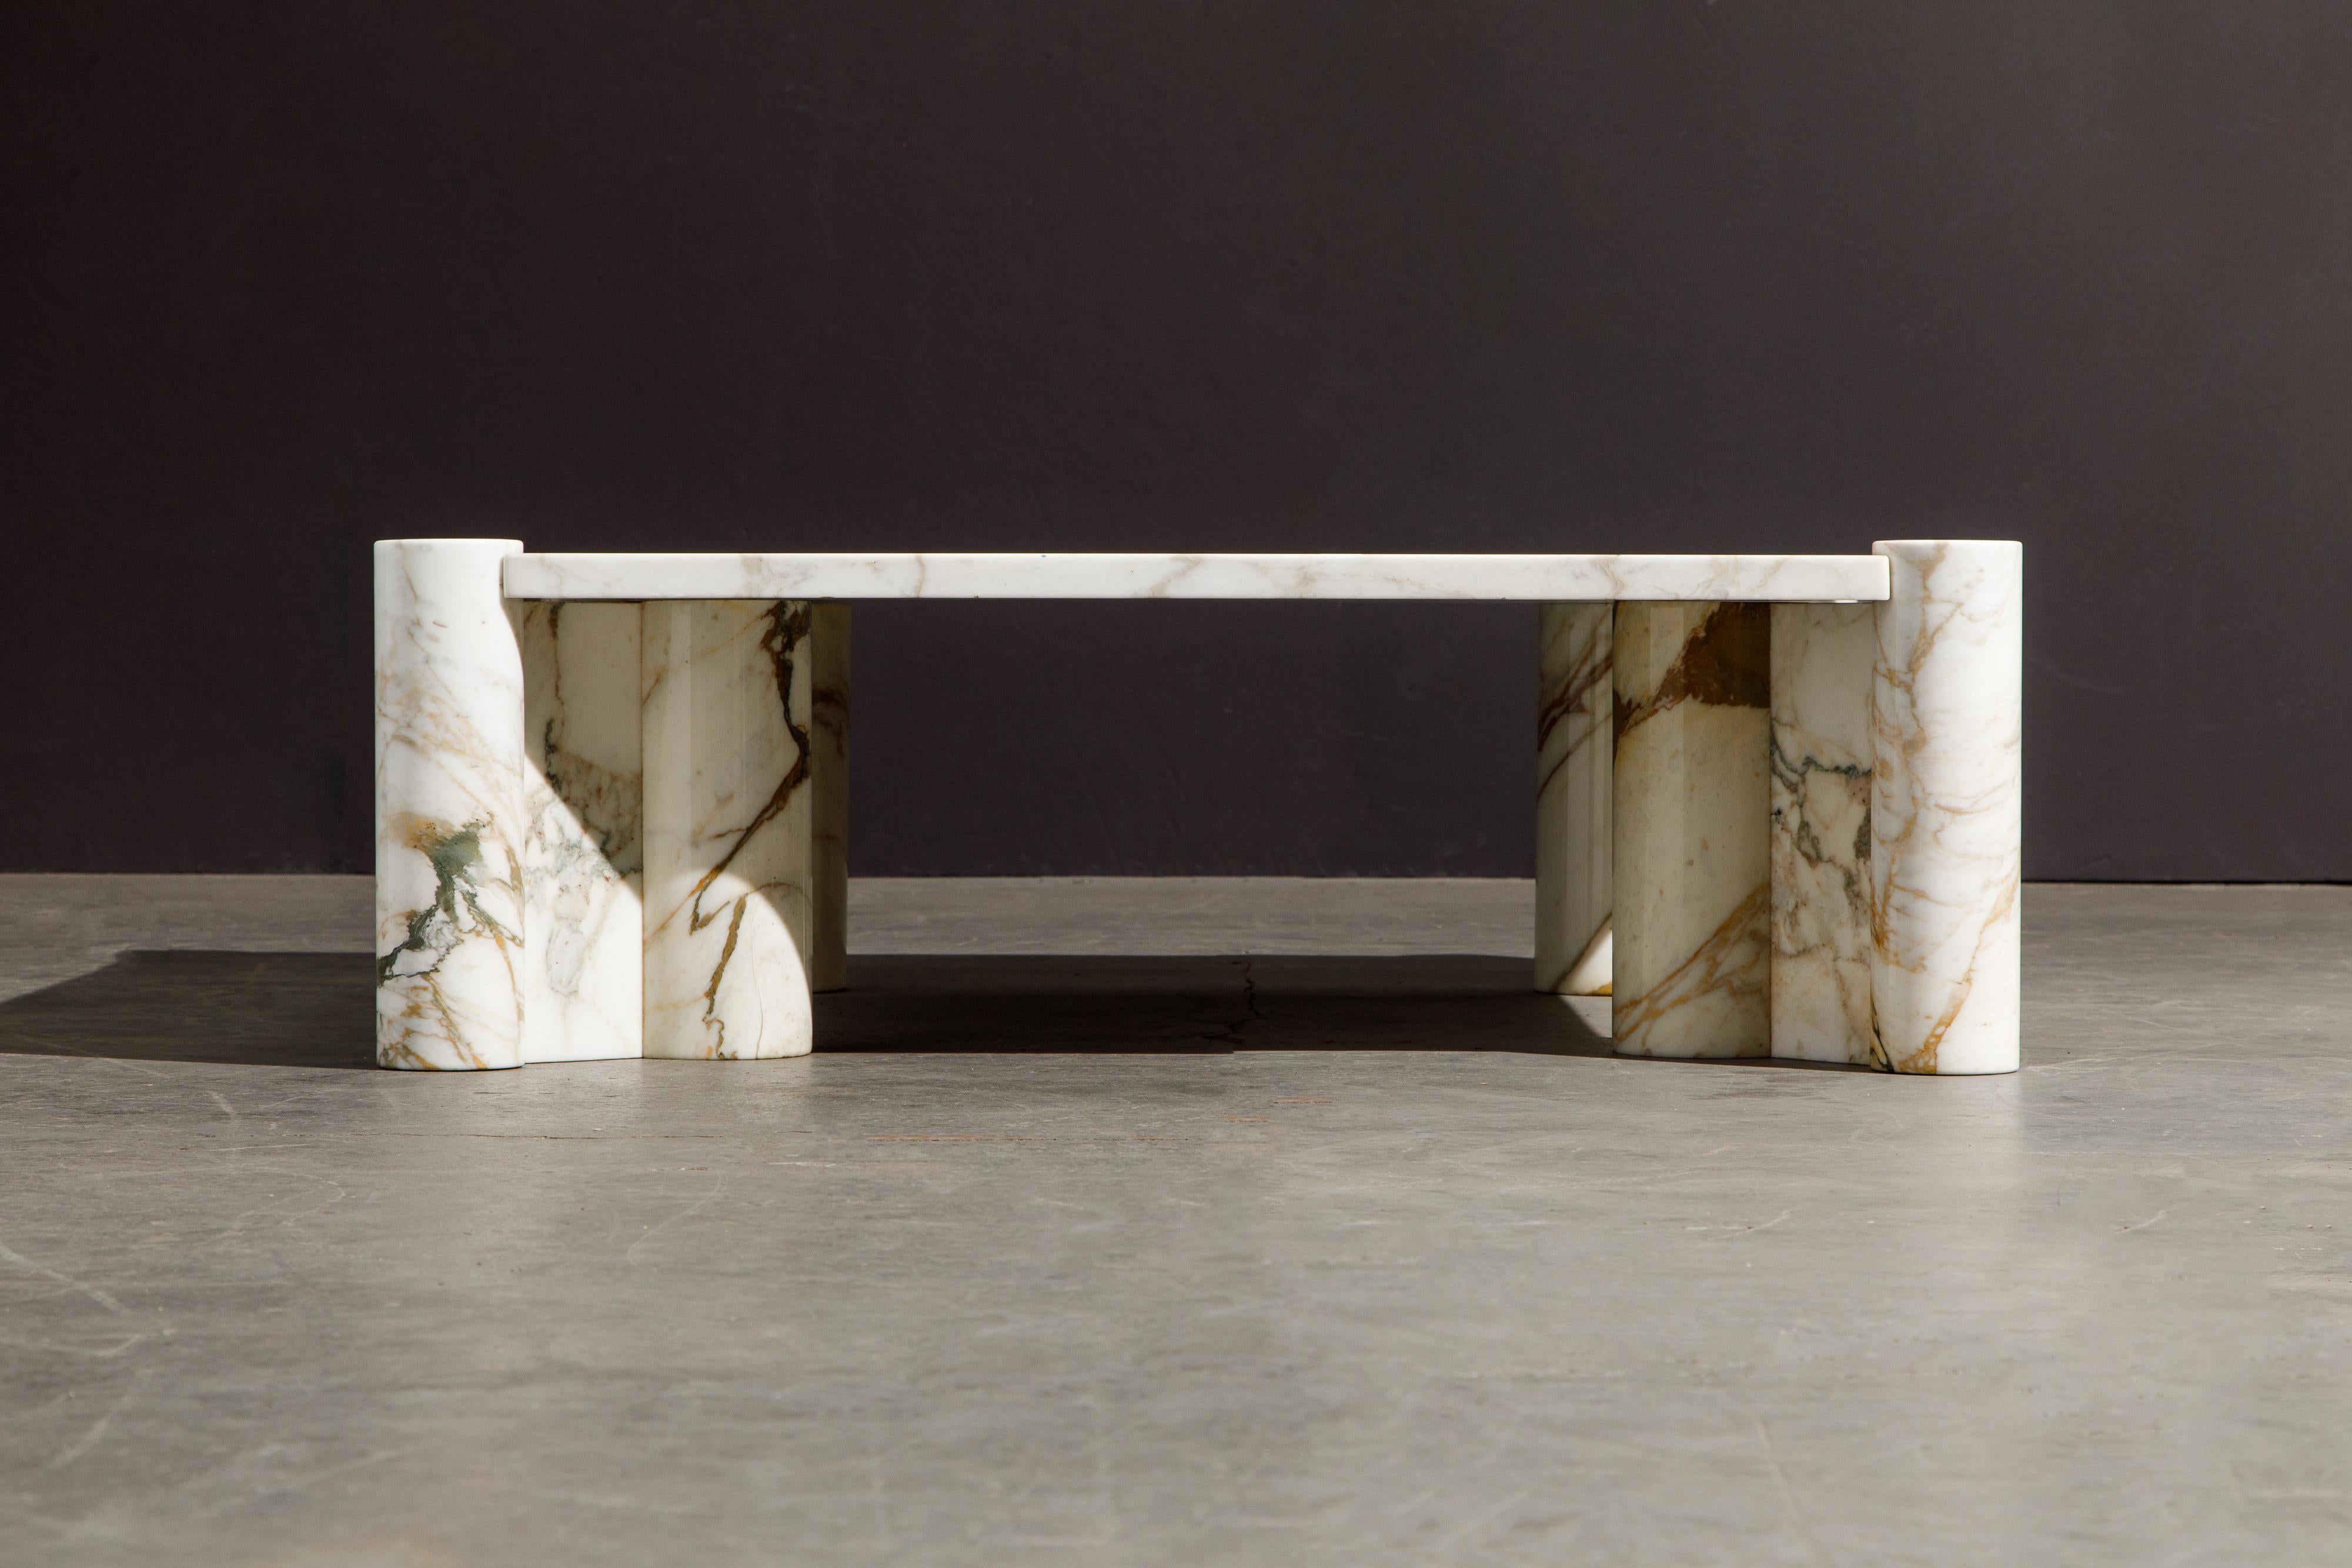 This pièce de résistance is considered the holy grail of 'Jumbo' cocktail tables due to the rare golden Calacatta marble which features dramatic veins in gold and grey. The 'Jumbo' table is already extremely sought after and original early